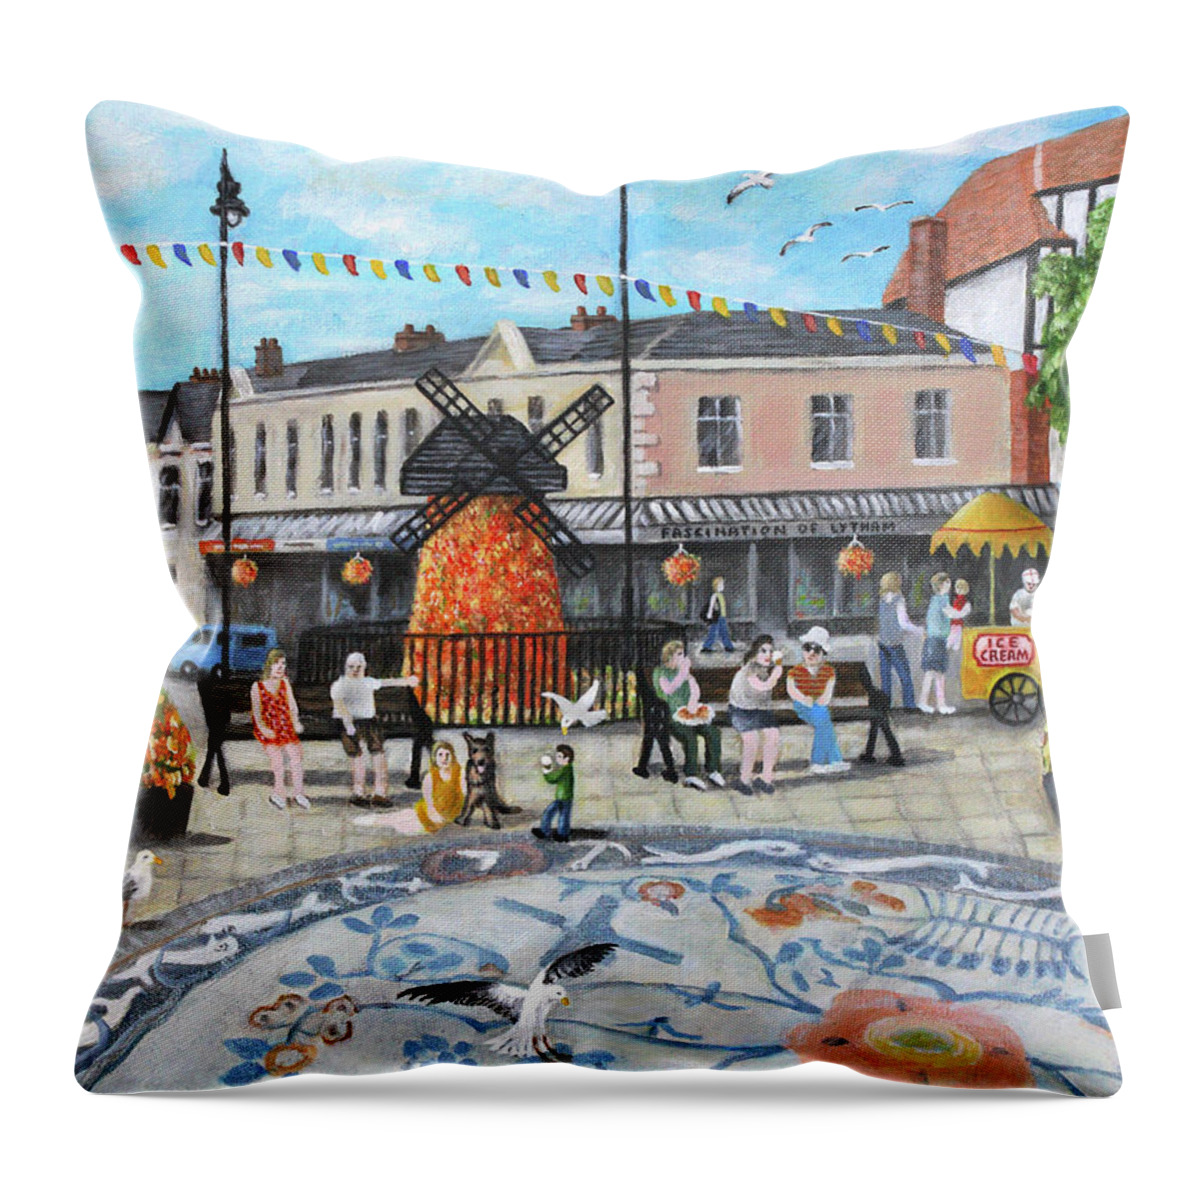 Clifton Square Throw Pillow featuring the painting Clifton Square Lytham St Annes On Sea by Ronald Haber